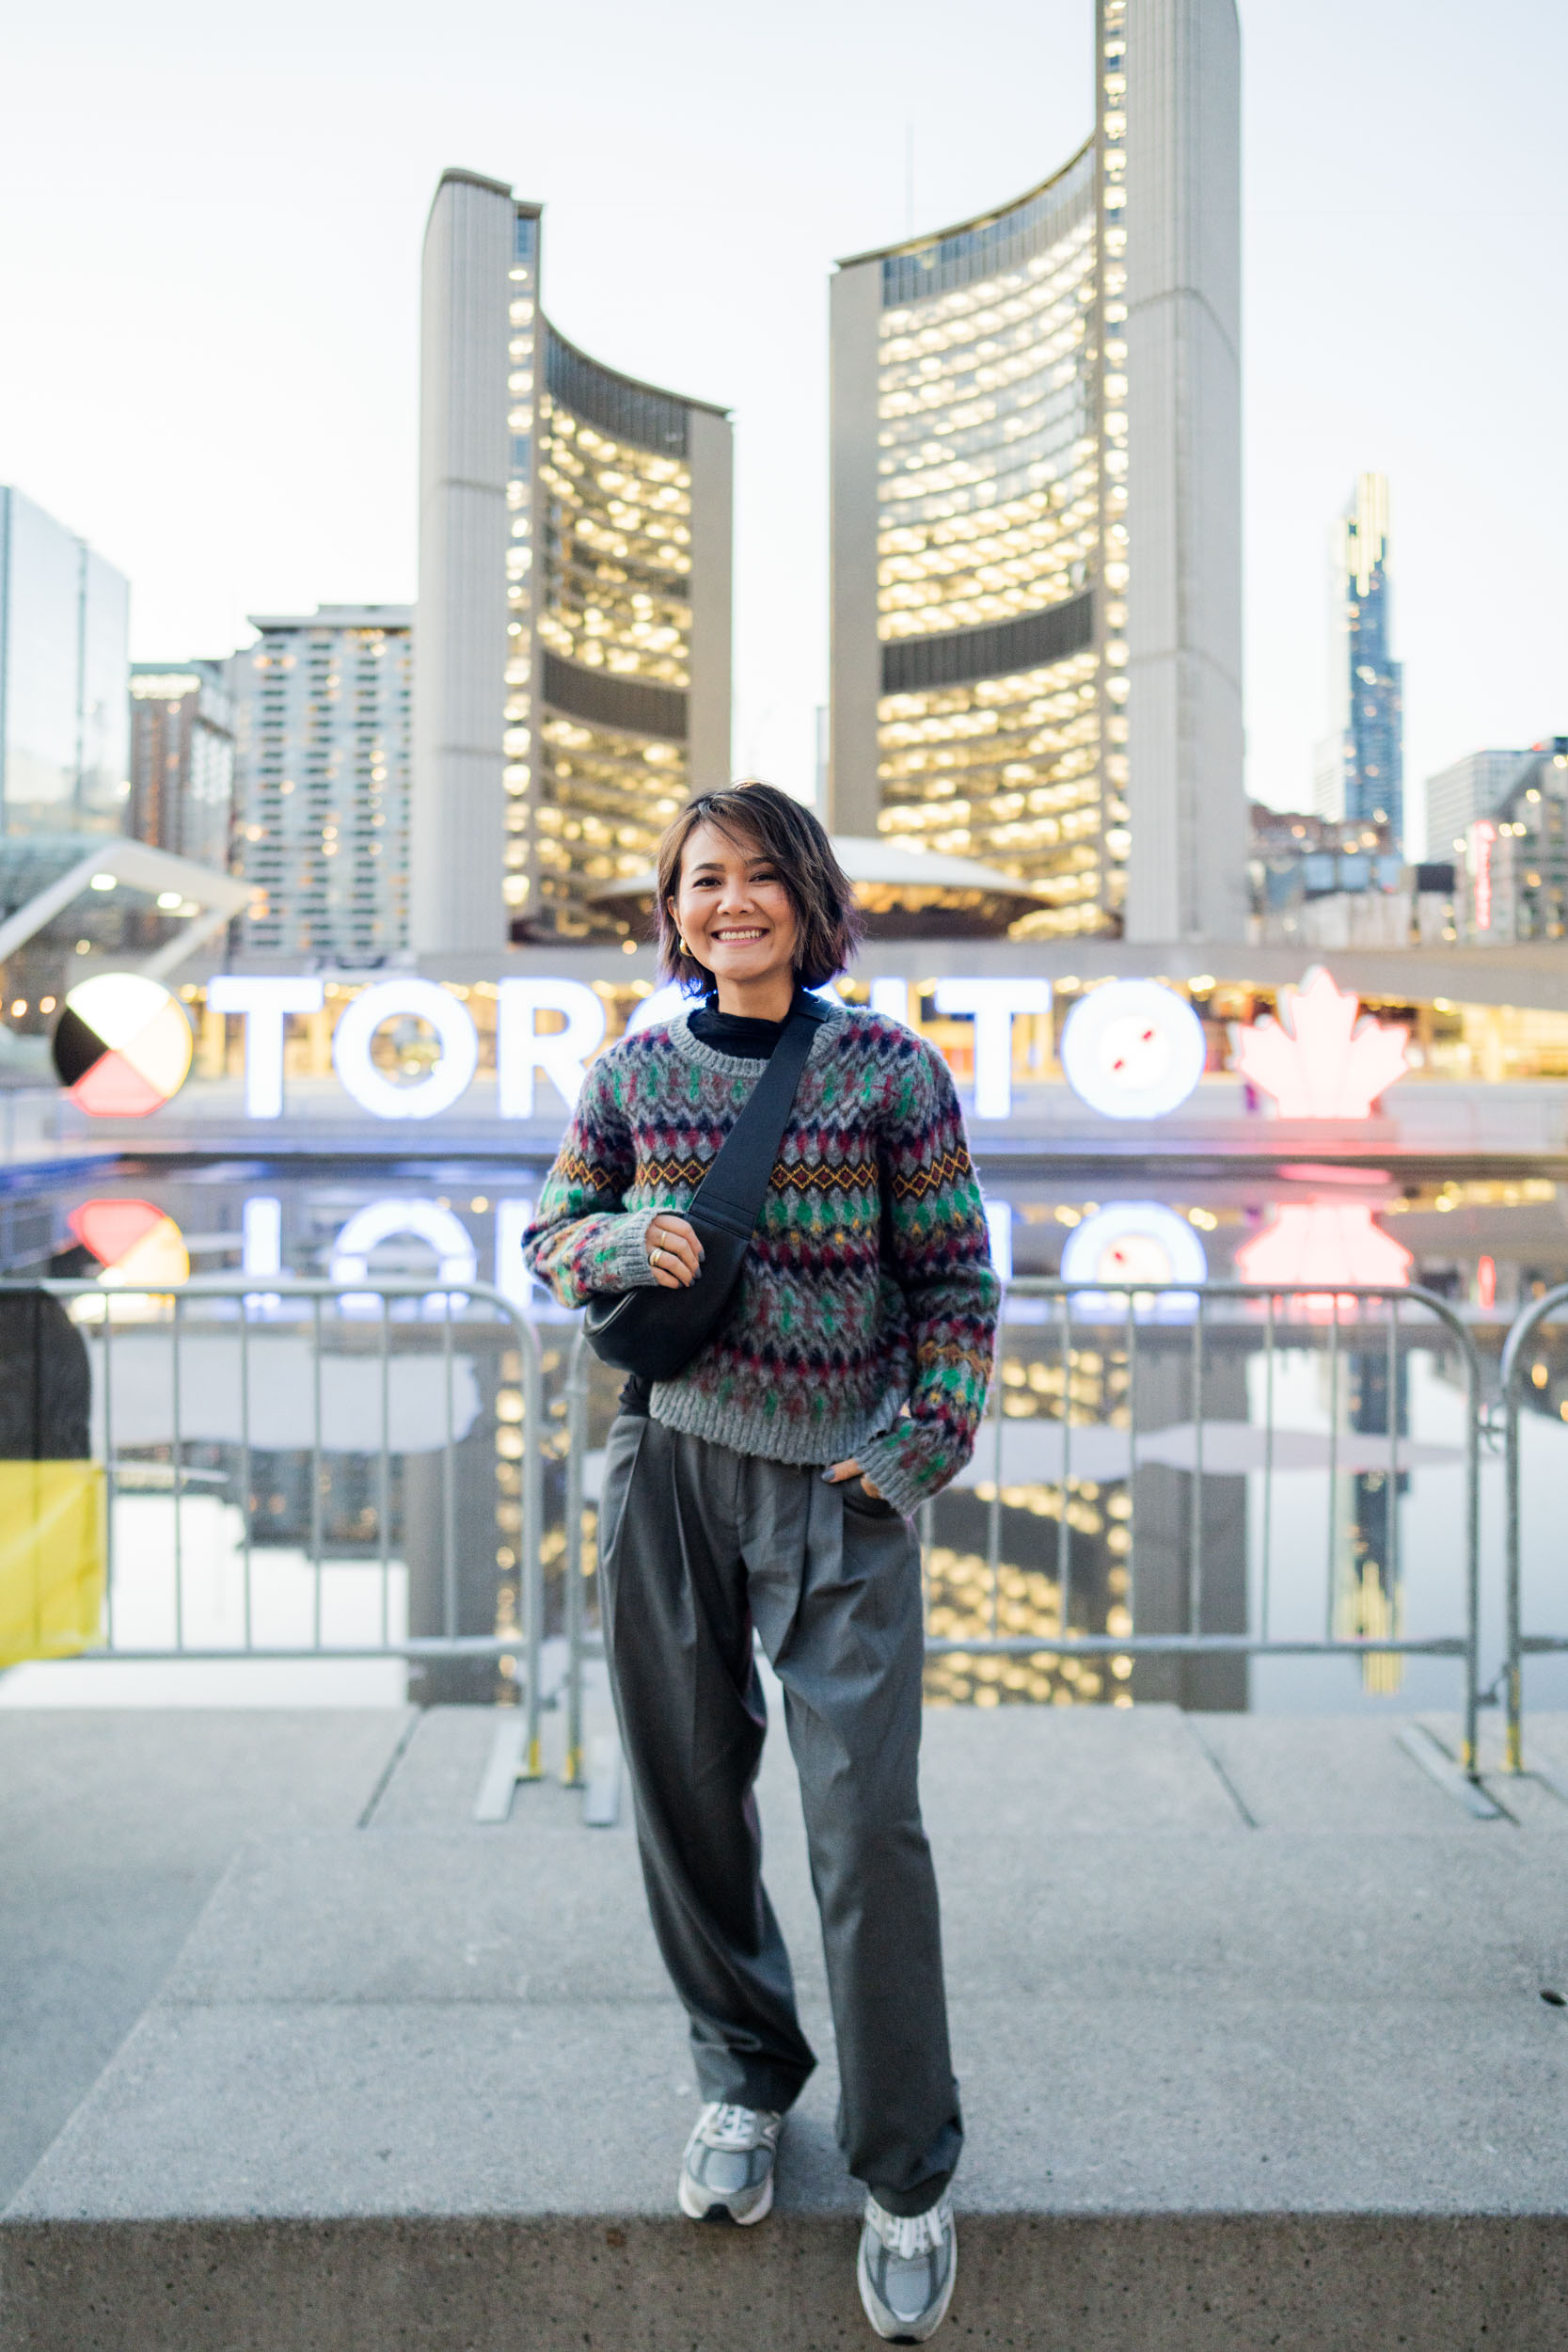 toronto travel guide by an trieu nathan phillips square sign